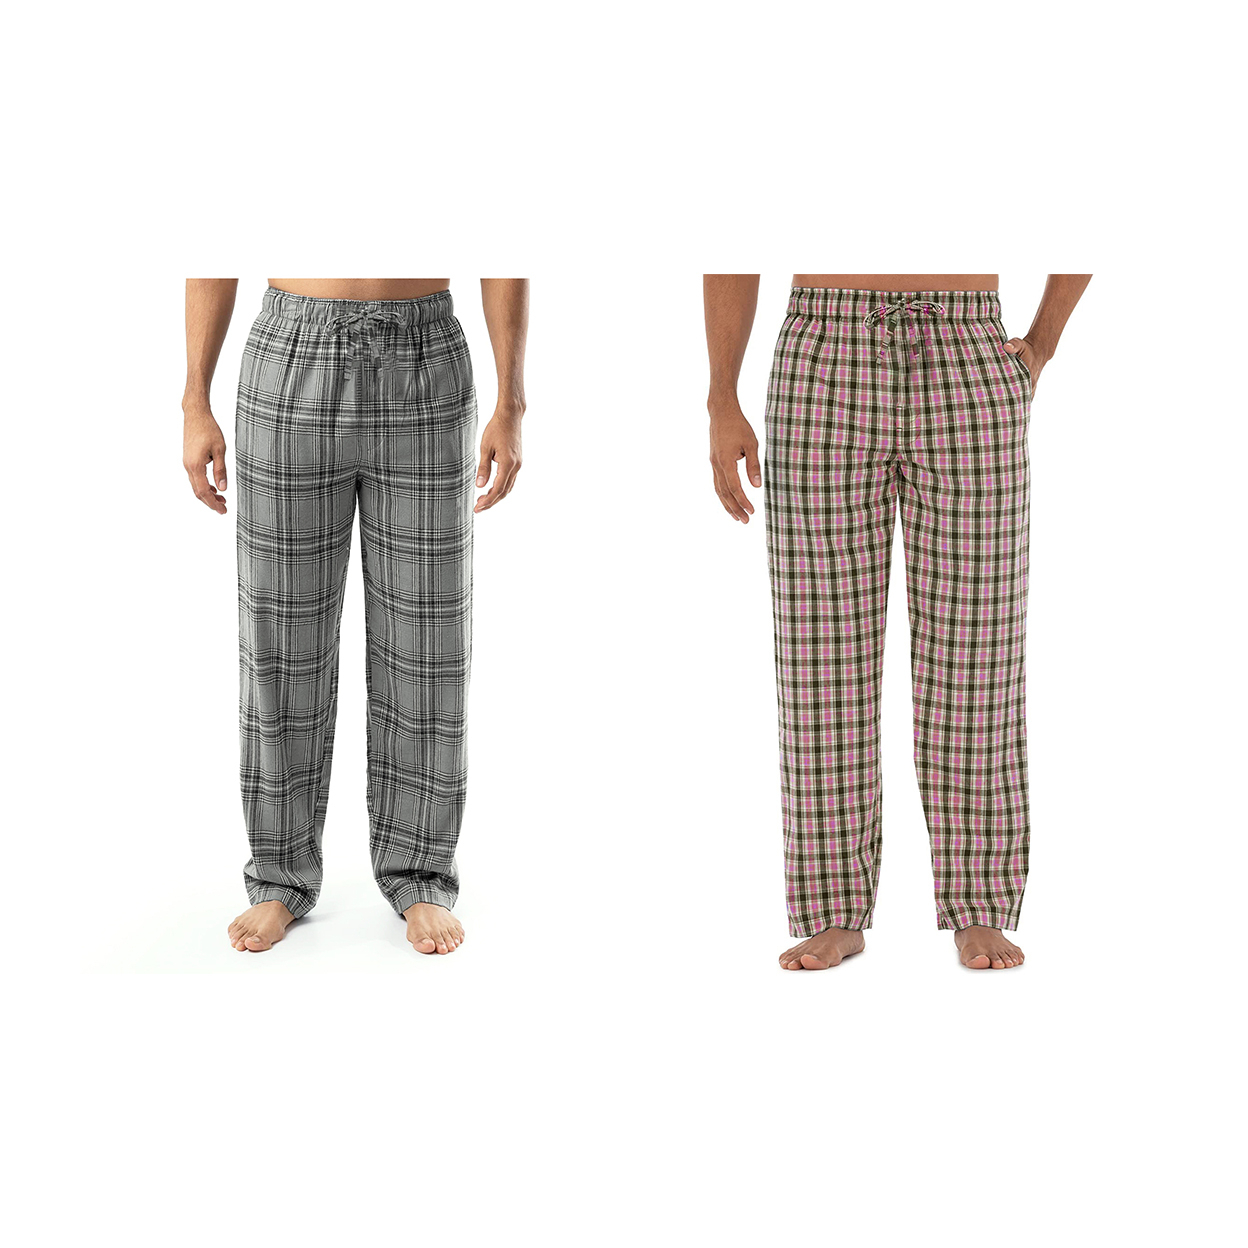 3-Pack: Men's Soft Jersey Knit Long Lounge Sleep Pants With Pockets - Solid & Plaid, Small